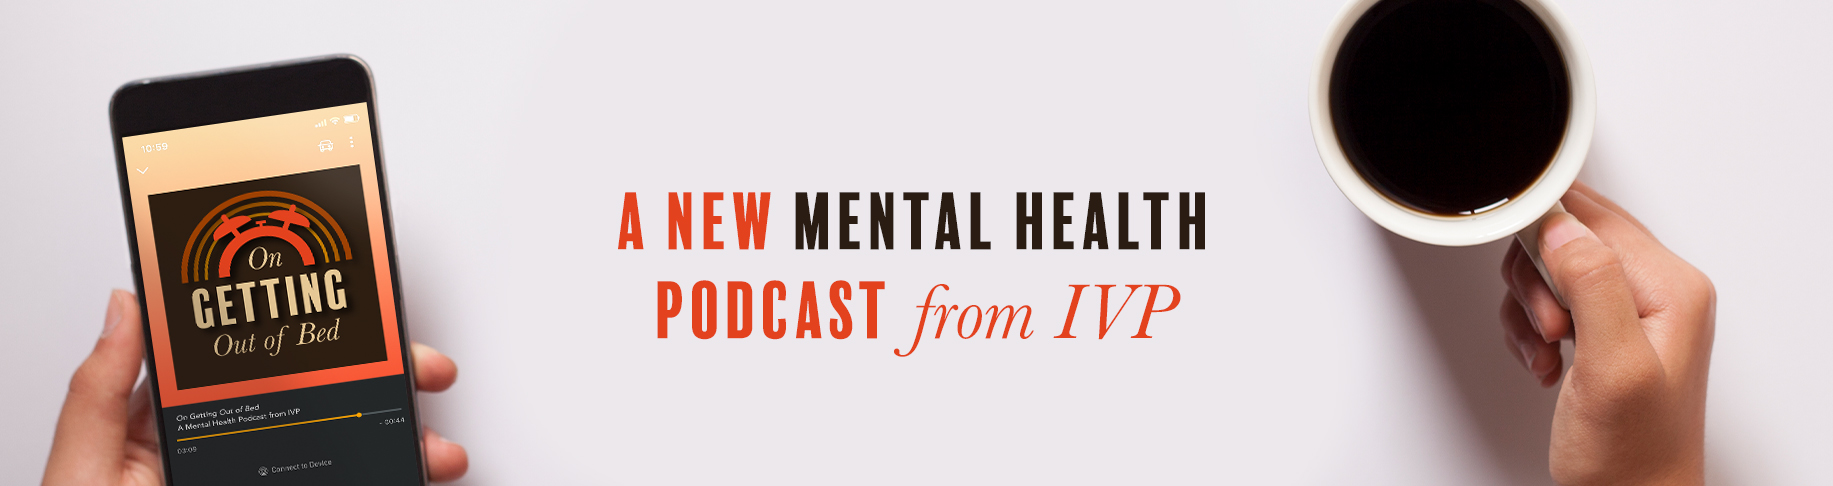 A New Mental Health Podcast from IVP